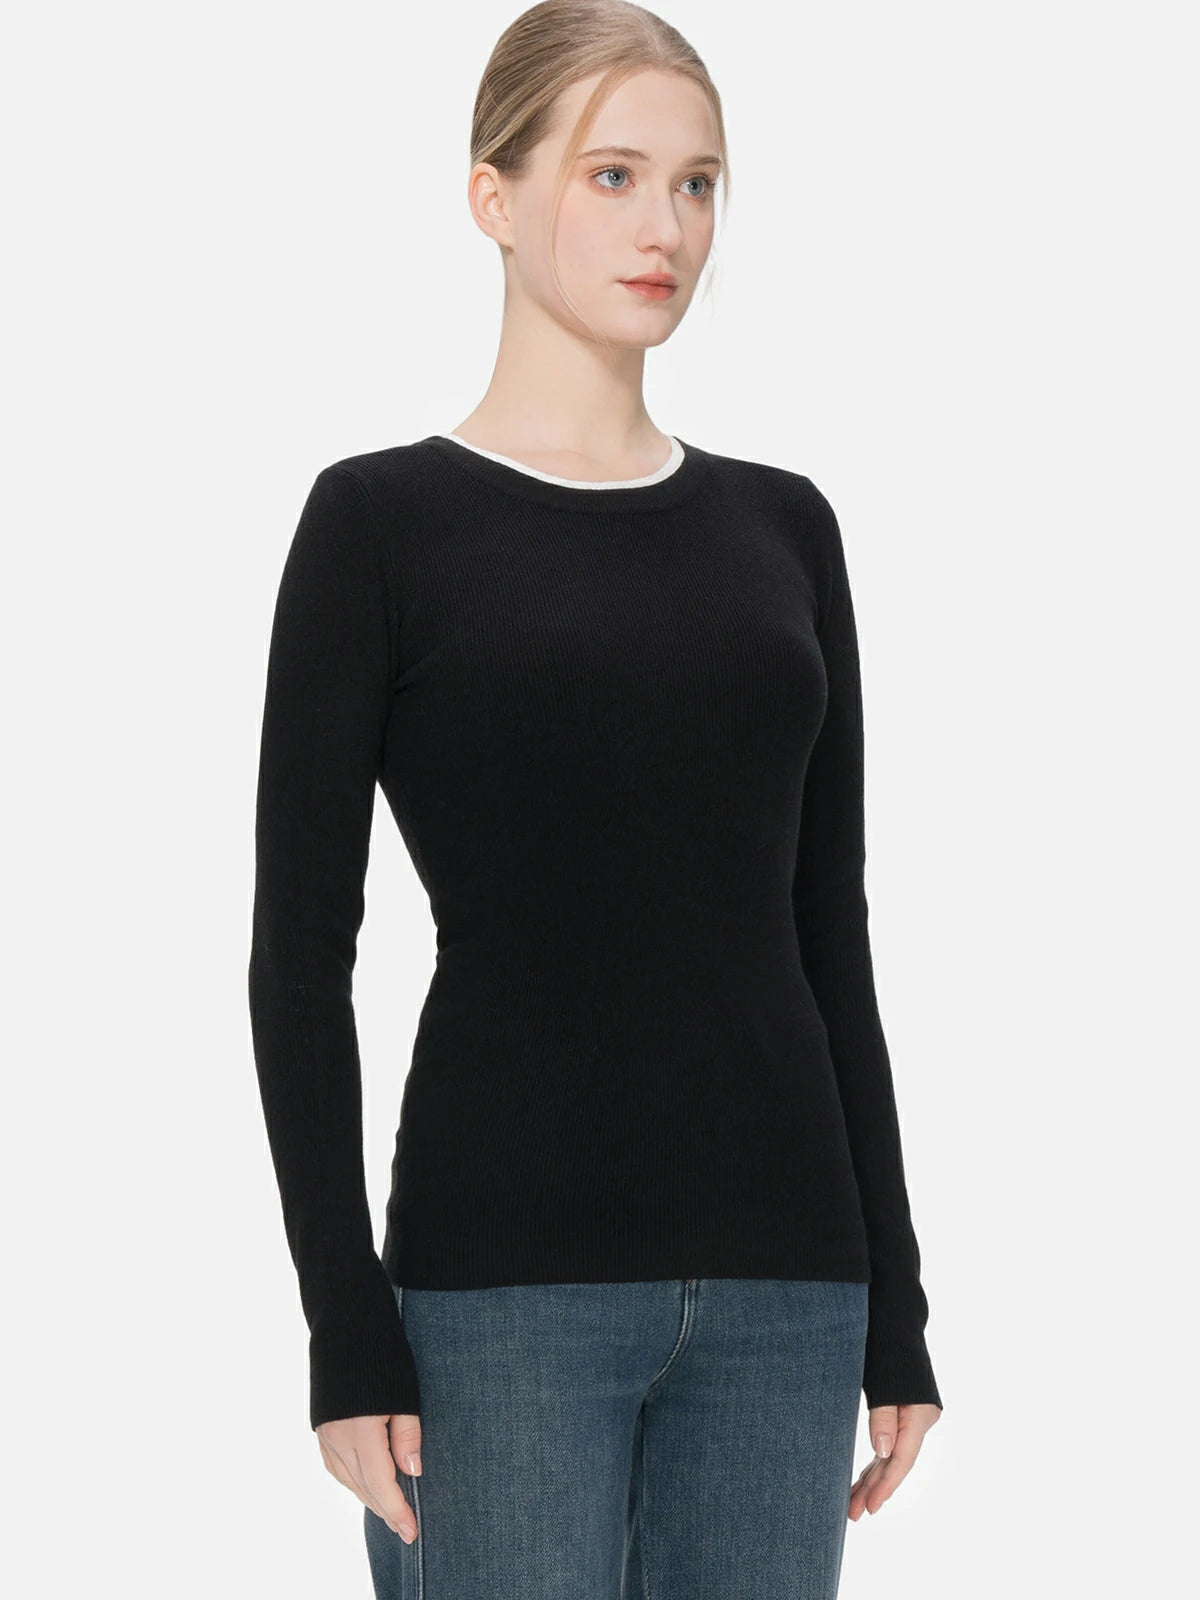 Minimalist and understated luxury in the black knit sweater